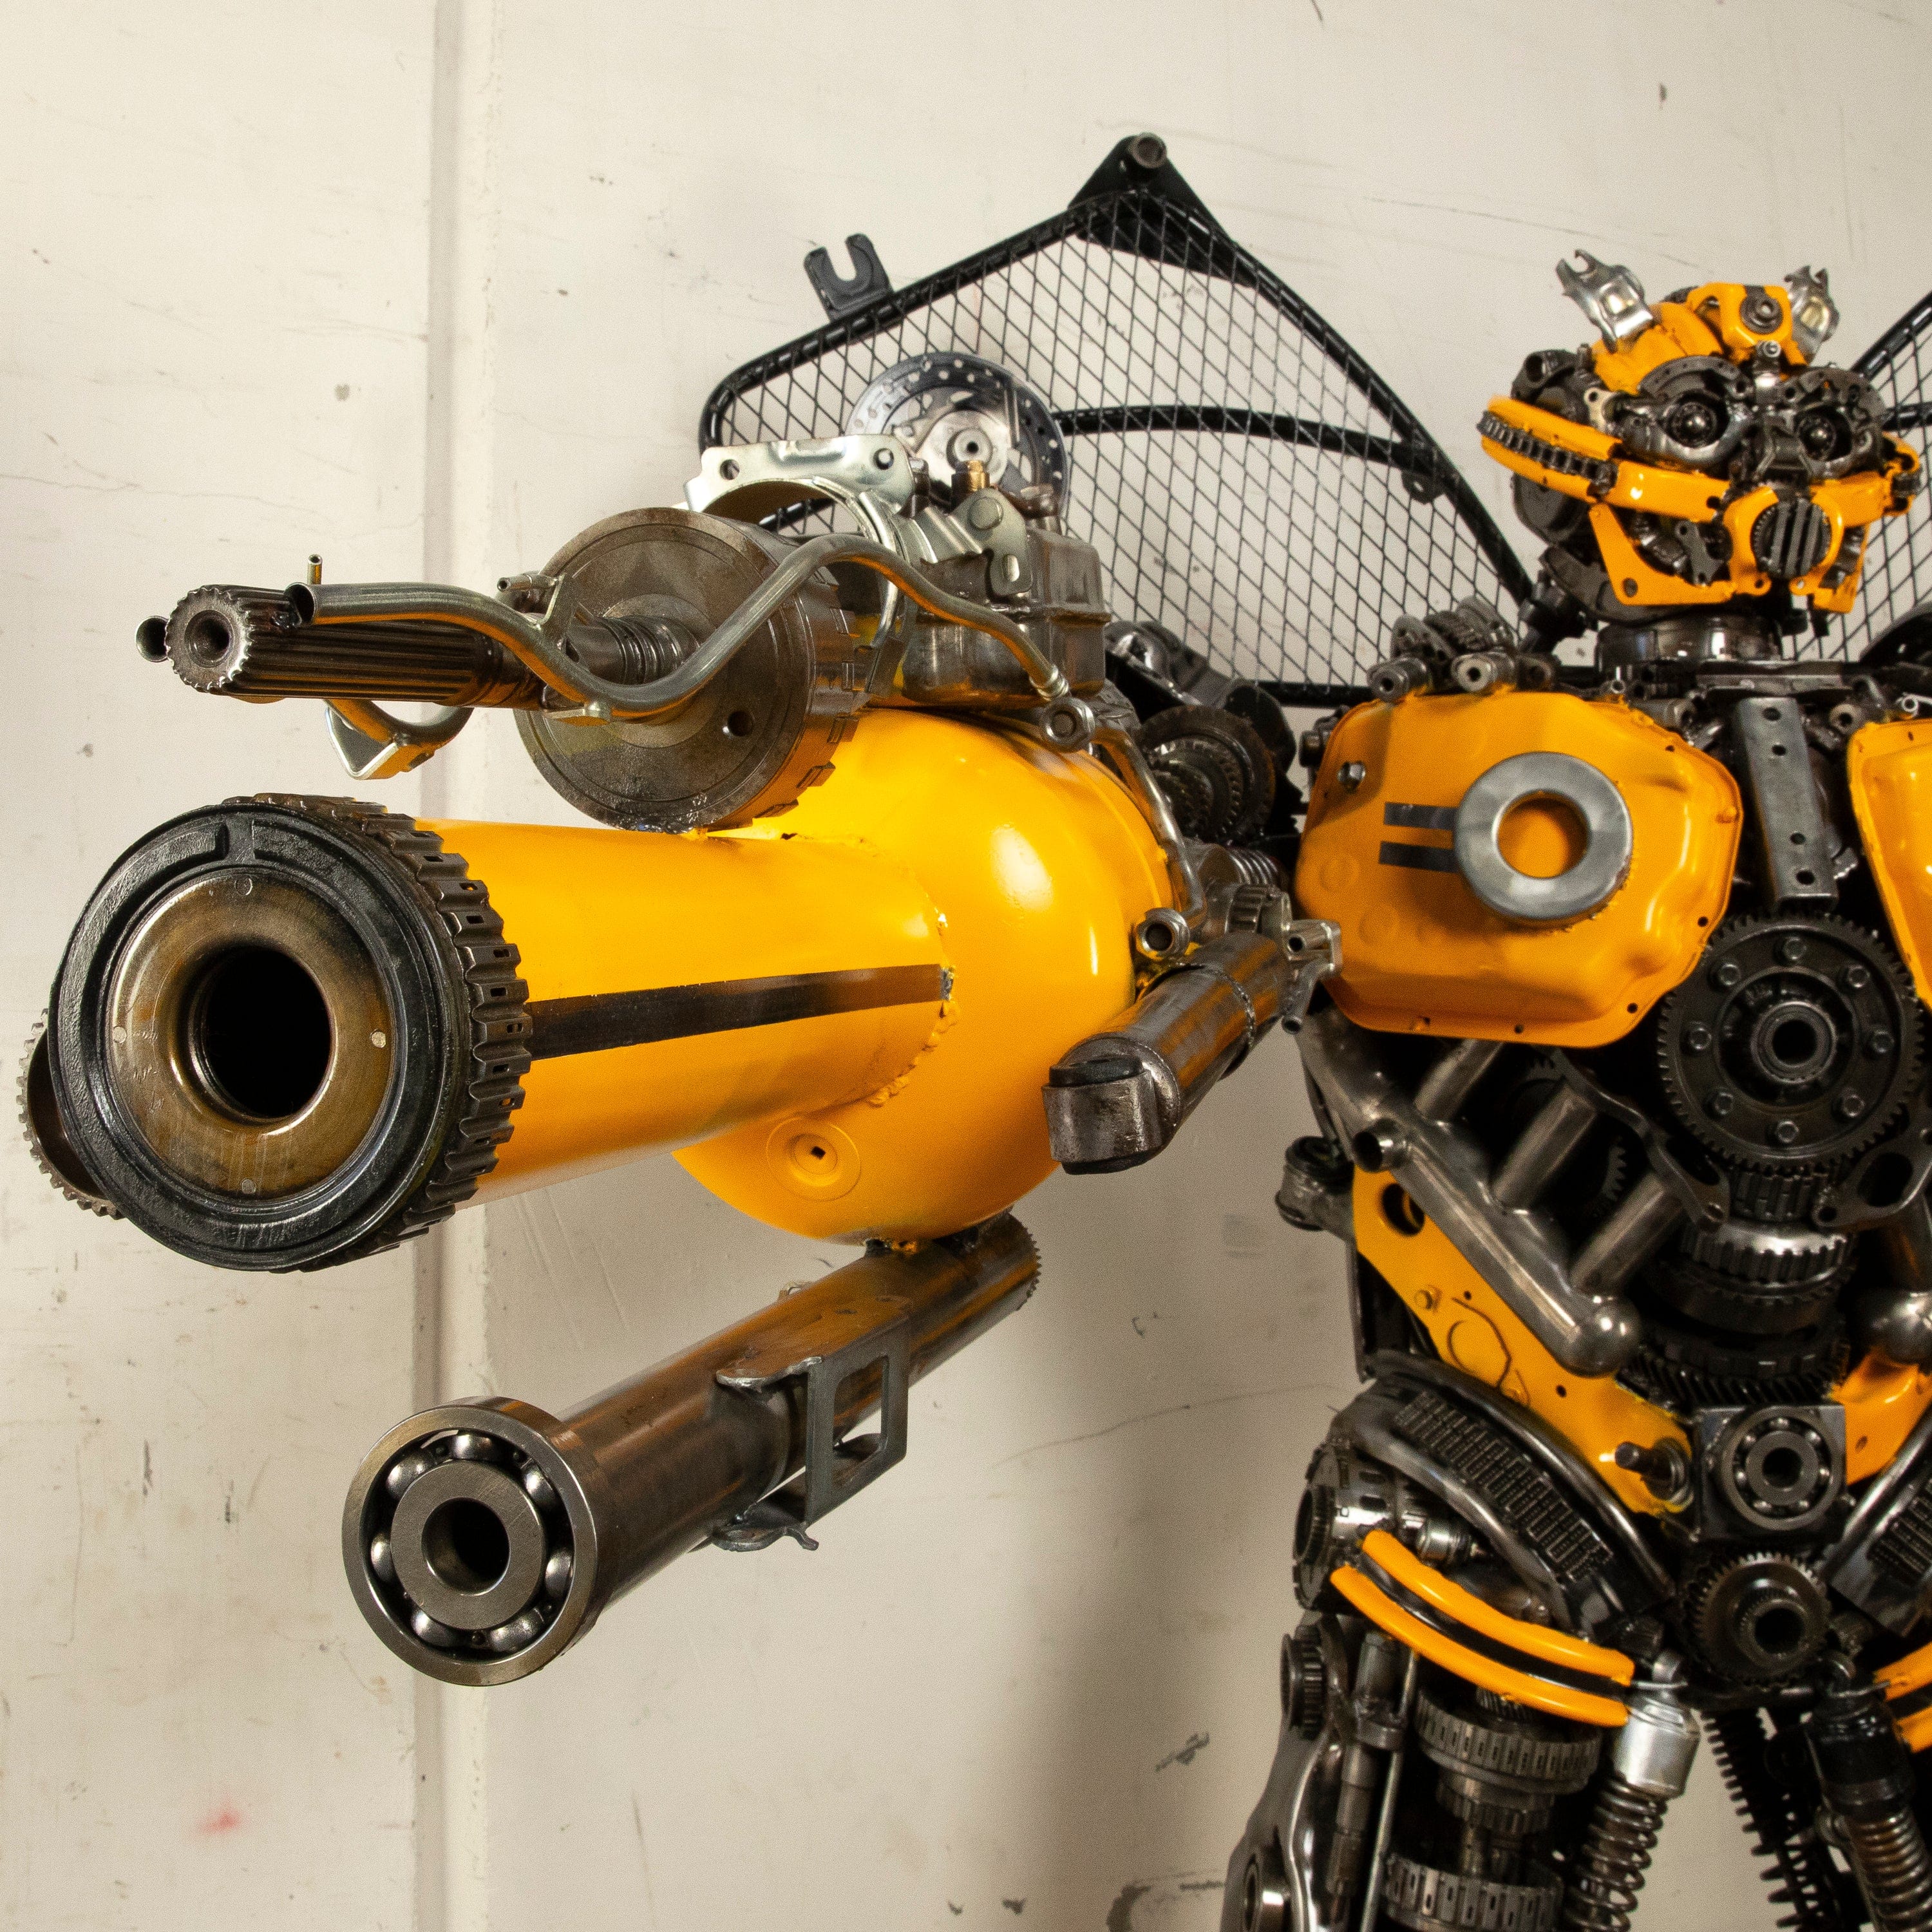 Kalifano Recycled Metal Art 79" Bumblebee Inspired Recycled Metal Art Sculpture RMS-BB200-S20